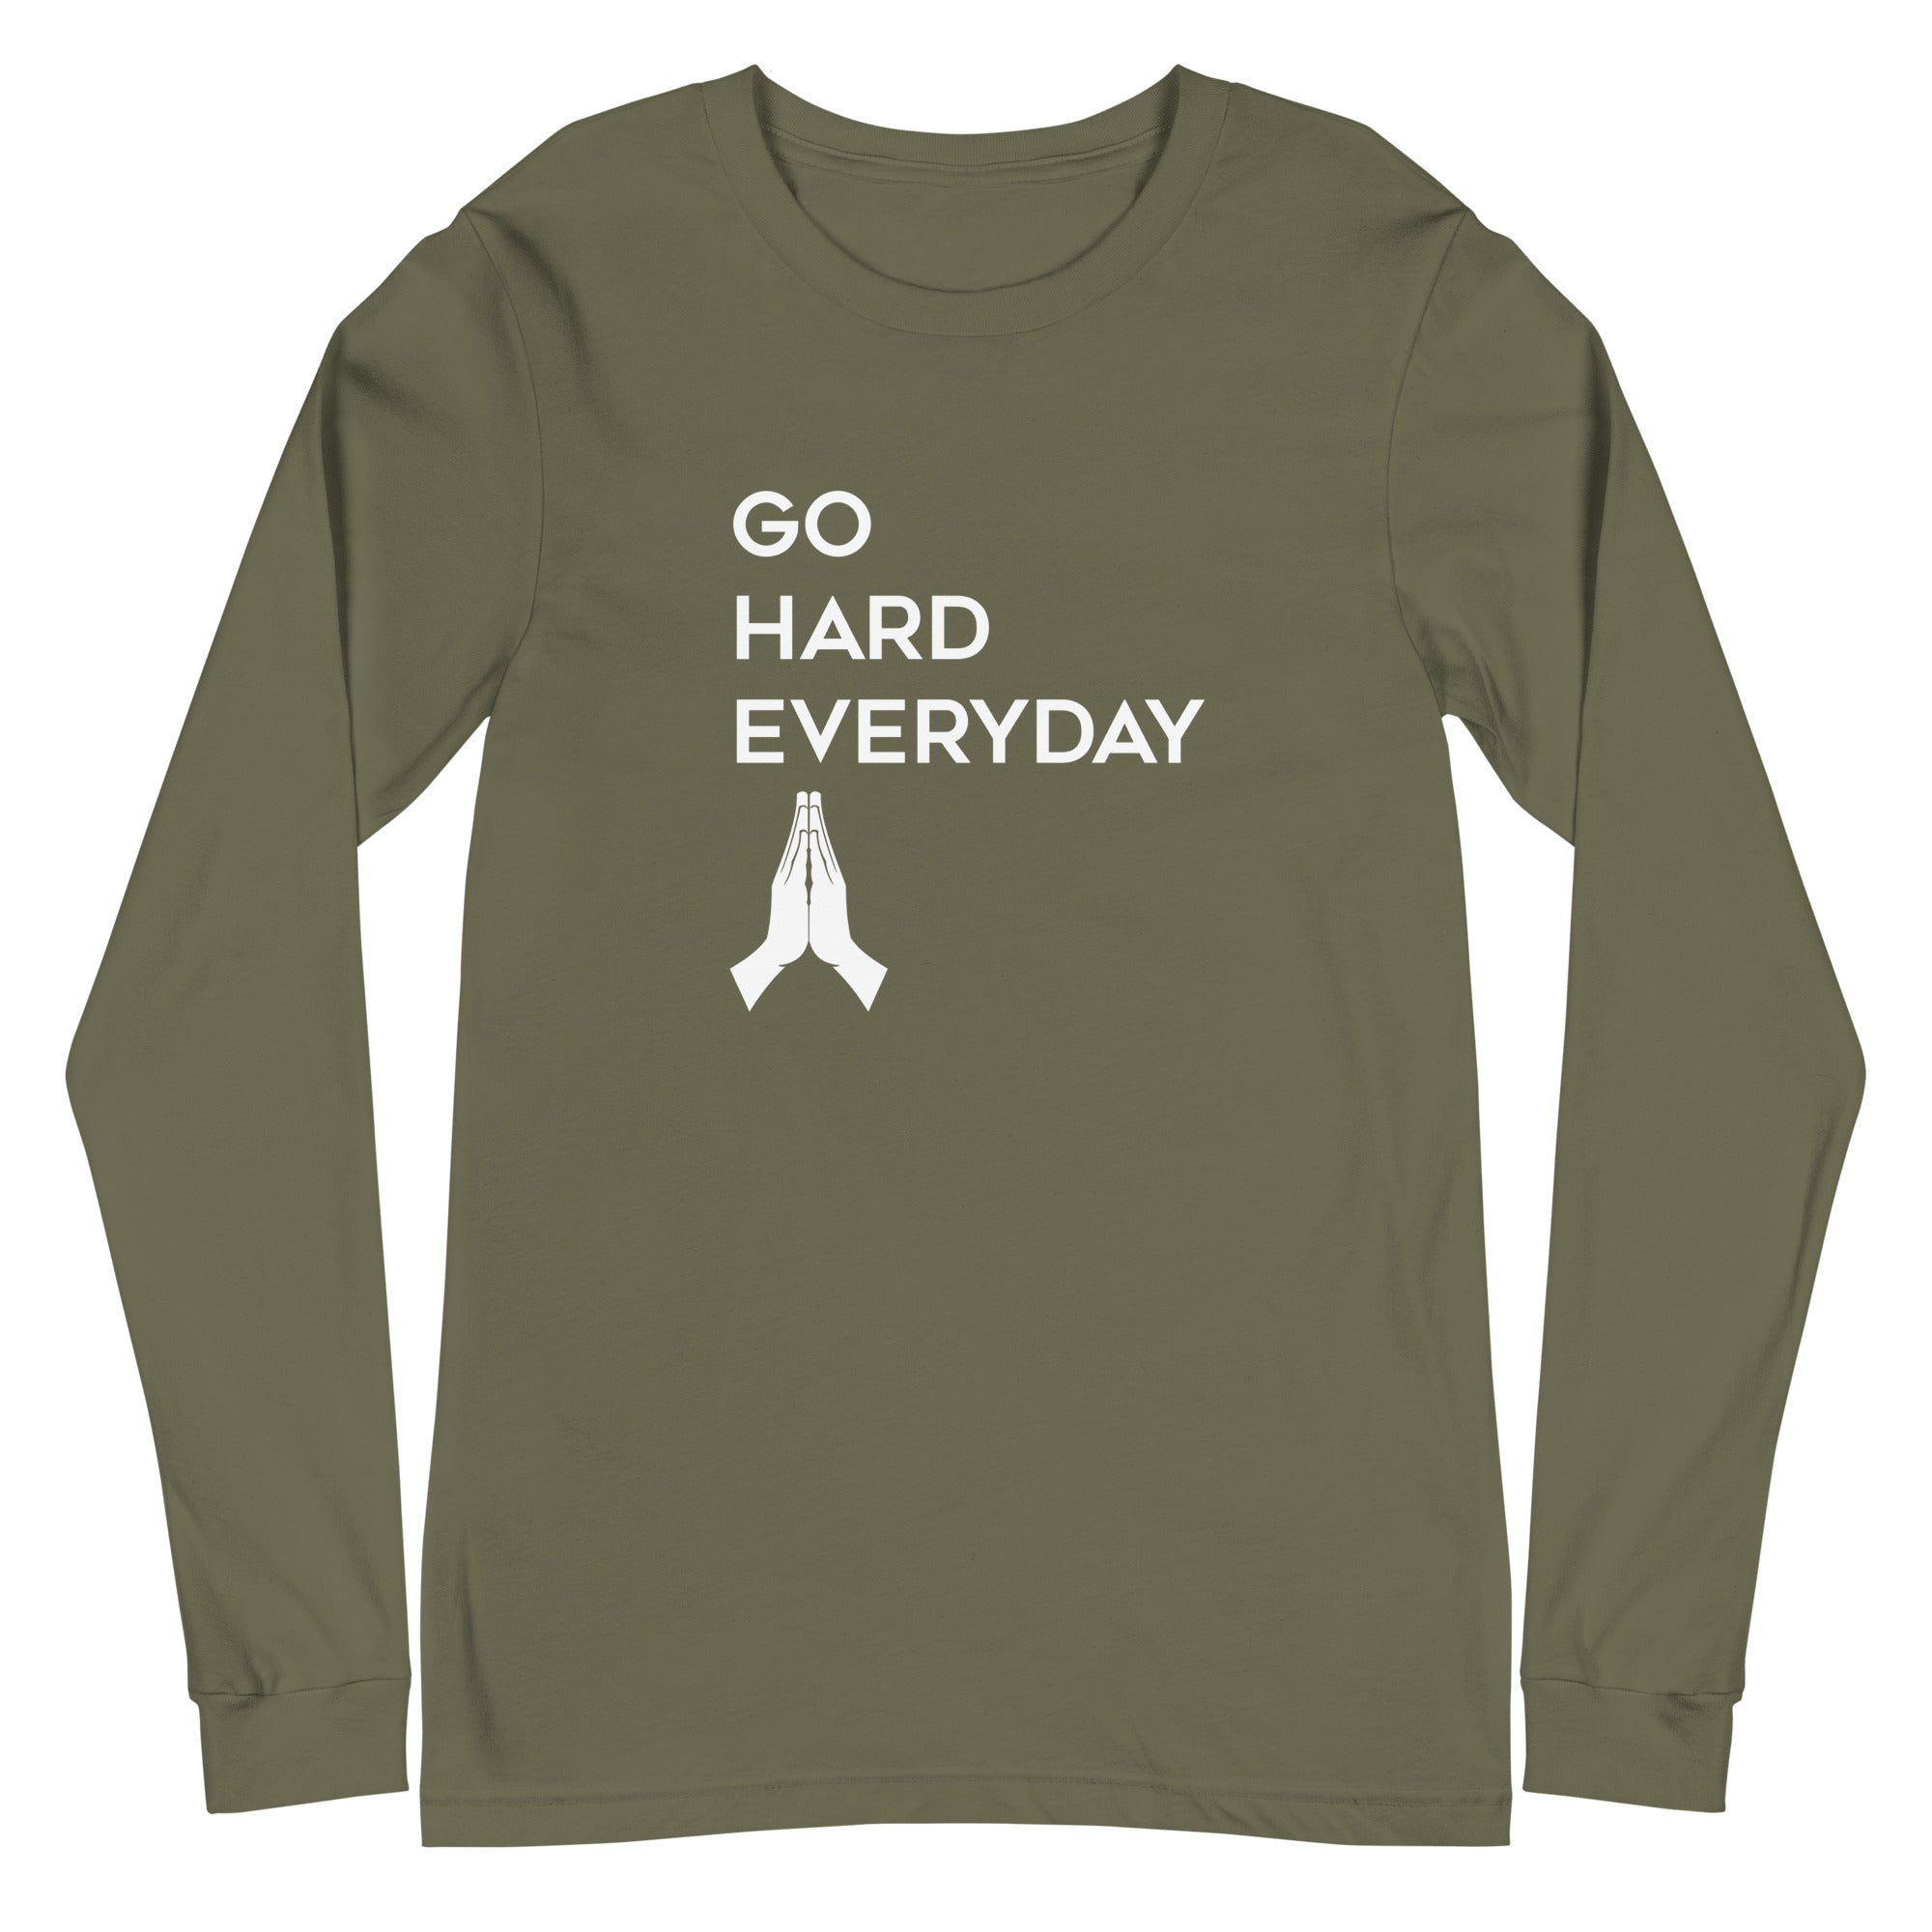 Go Hard Everyday, Used By God, Used By God Clothing, Christian Apparel, Christian T-Shirts, Christian Shirts, christian t shirts for women, Men's Christian T-Shirt, Christian Clothing, God Shirts, christian clothing t shirts, Christian Sweatshirts, womens christian t shirts,t-shirts about jesus, God Clothing, Jesus Hoodie, Jesus Clothes, God Is Dope, Art Of Homage, Red Letter Clothing, Elevated Faith, Beacon Threads, God The Father Apparel